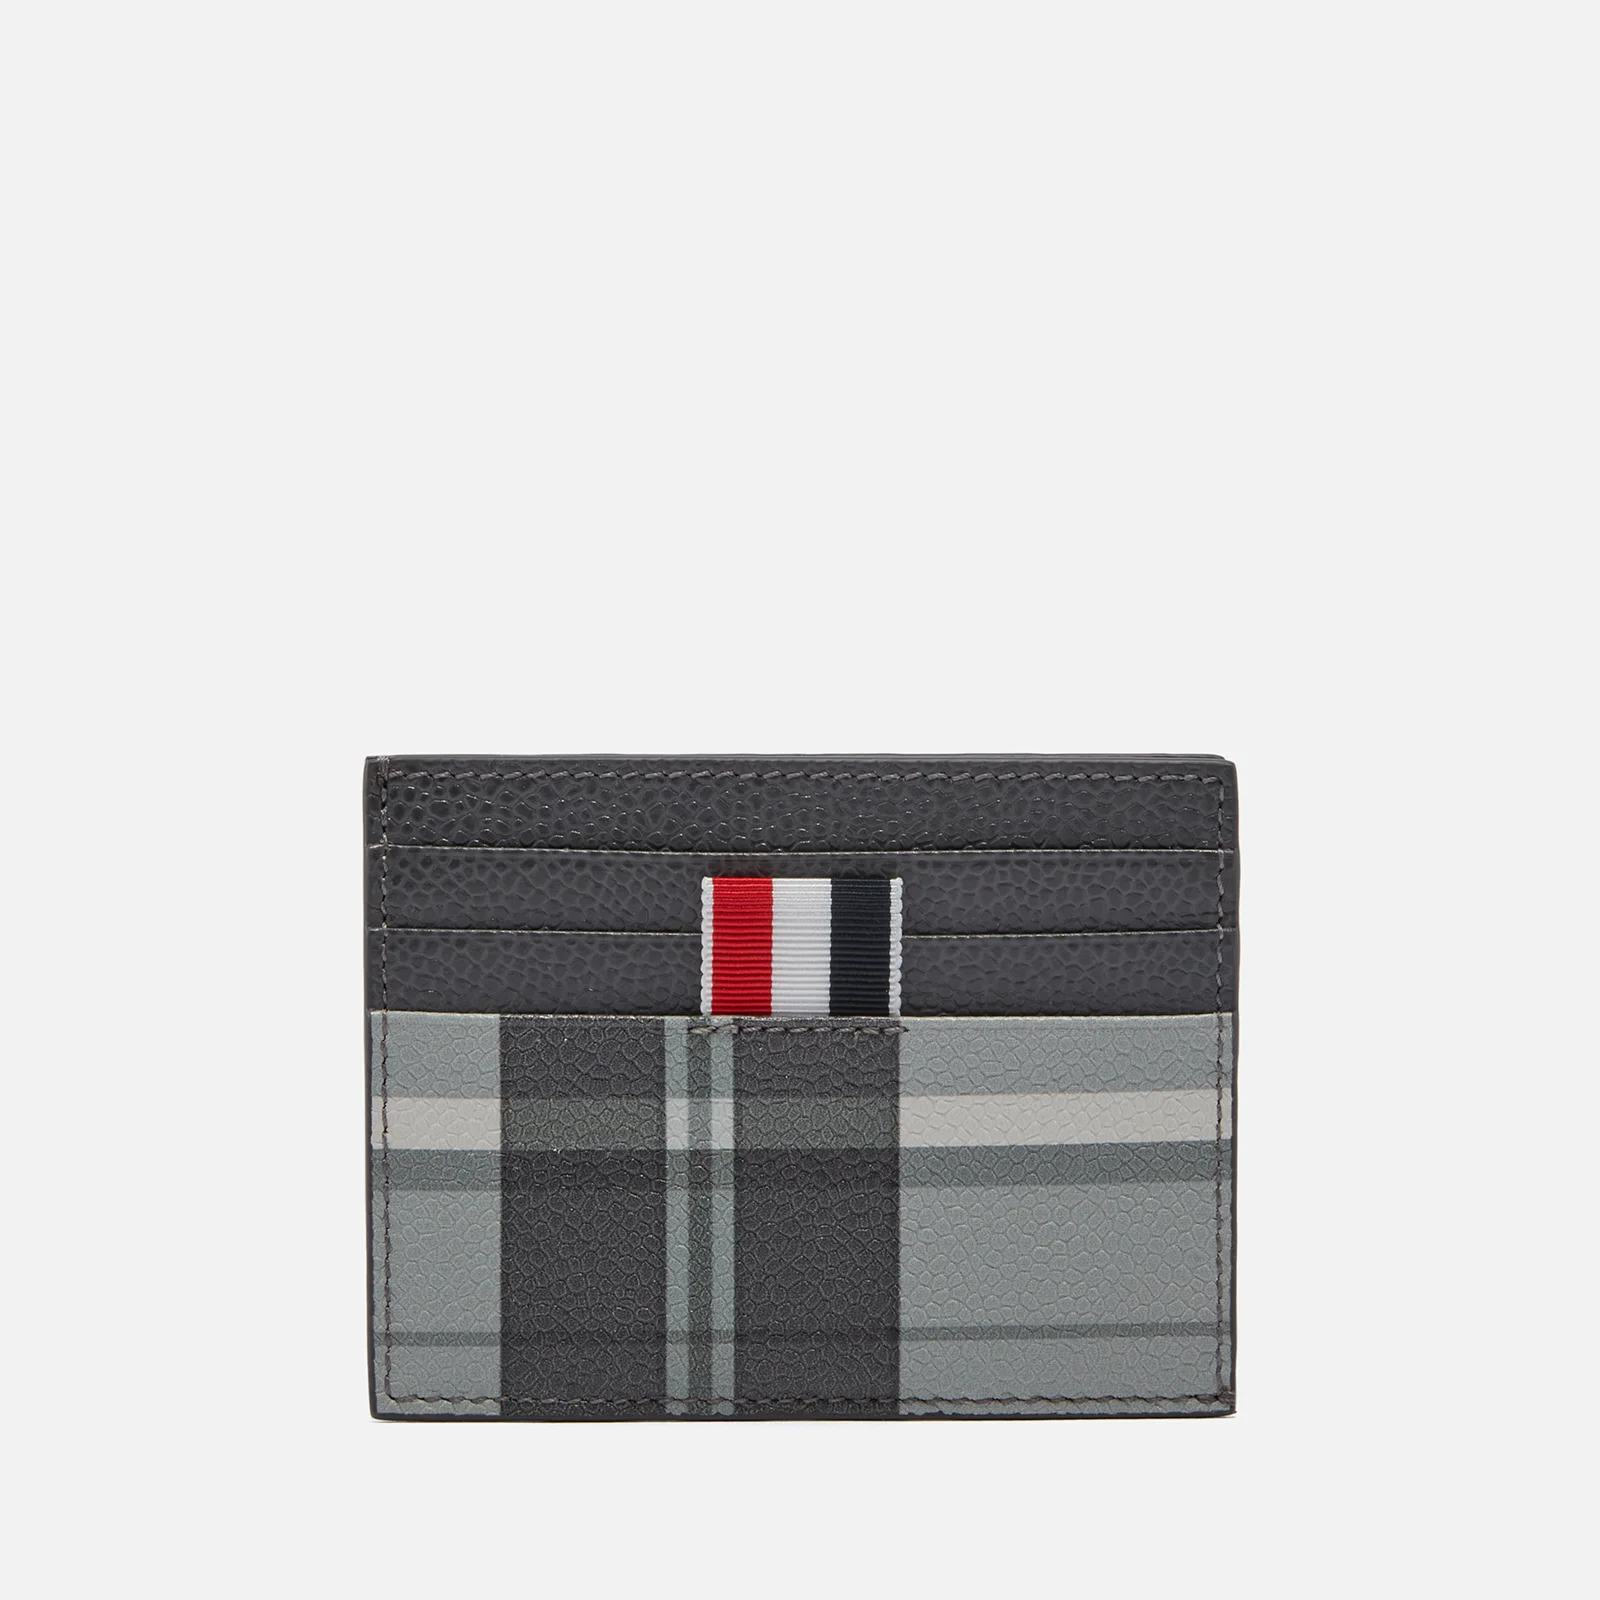 Thom Browne Checked Leather Cardholder Image 1